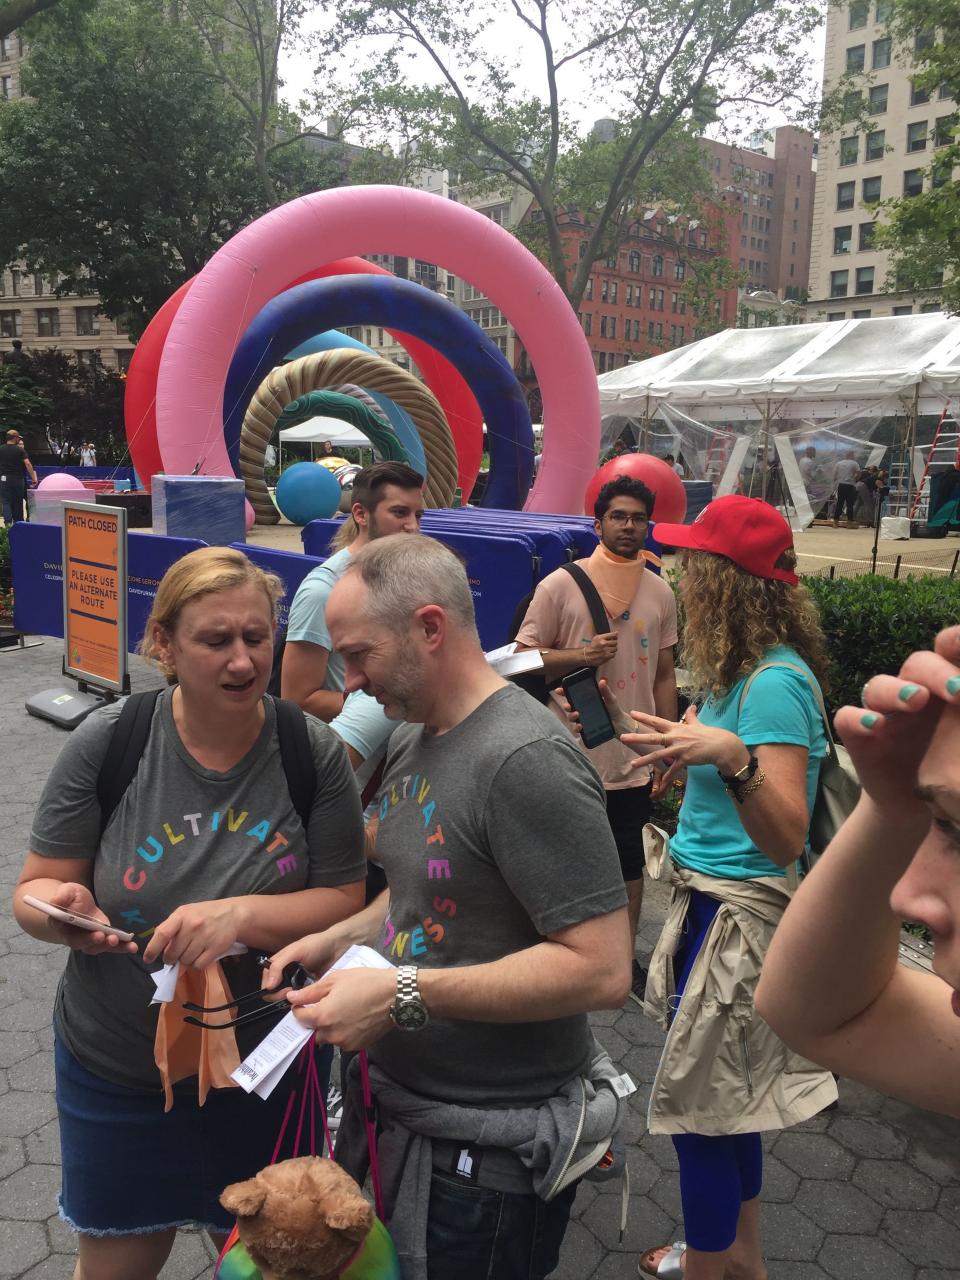 We know collaboration is best when we're all on the same page. Our summer events are meant to strengthen the bond of our teams all across the US, and our NY office rolled up their sleeves to help one another during their scavenger hunt!